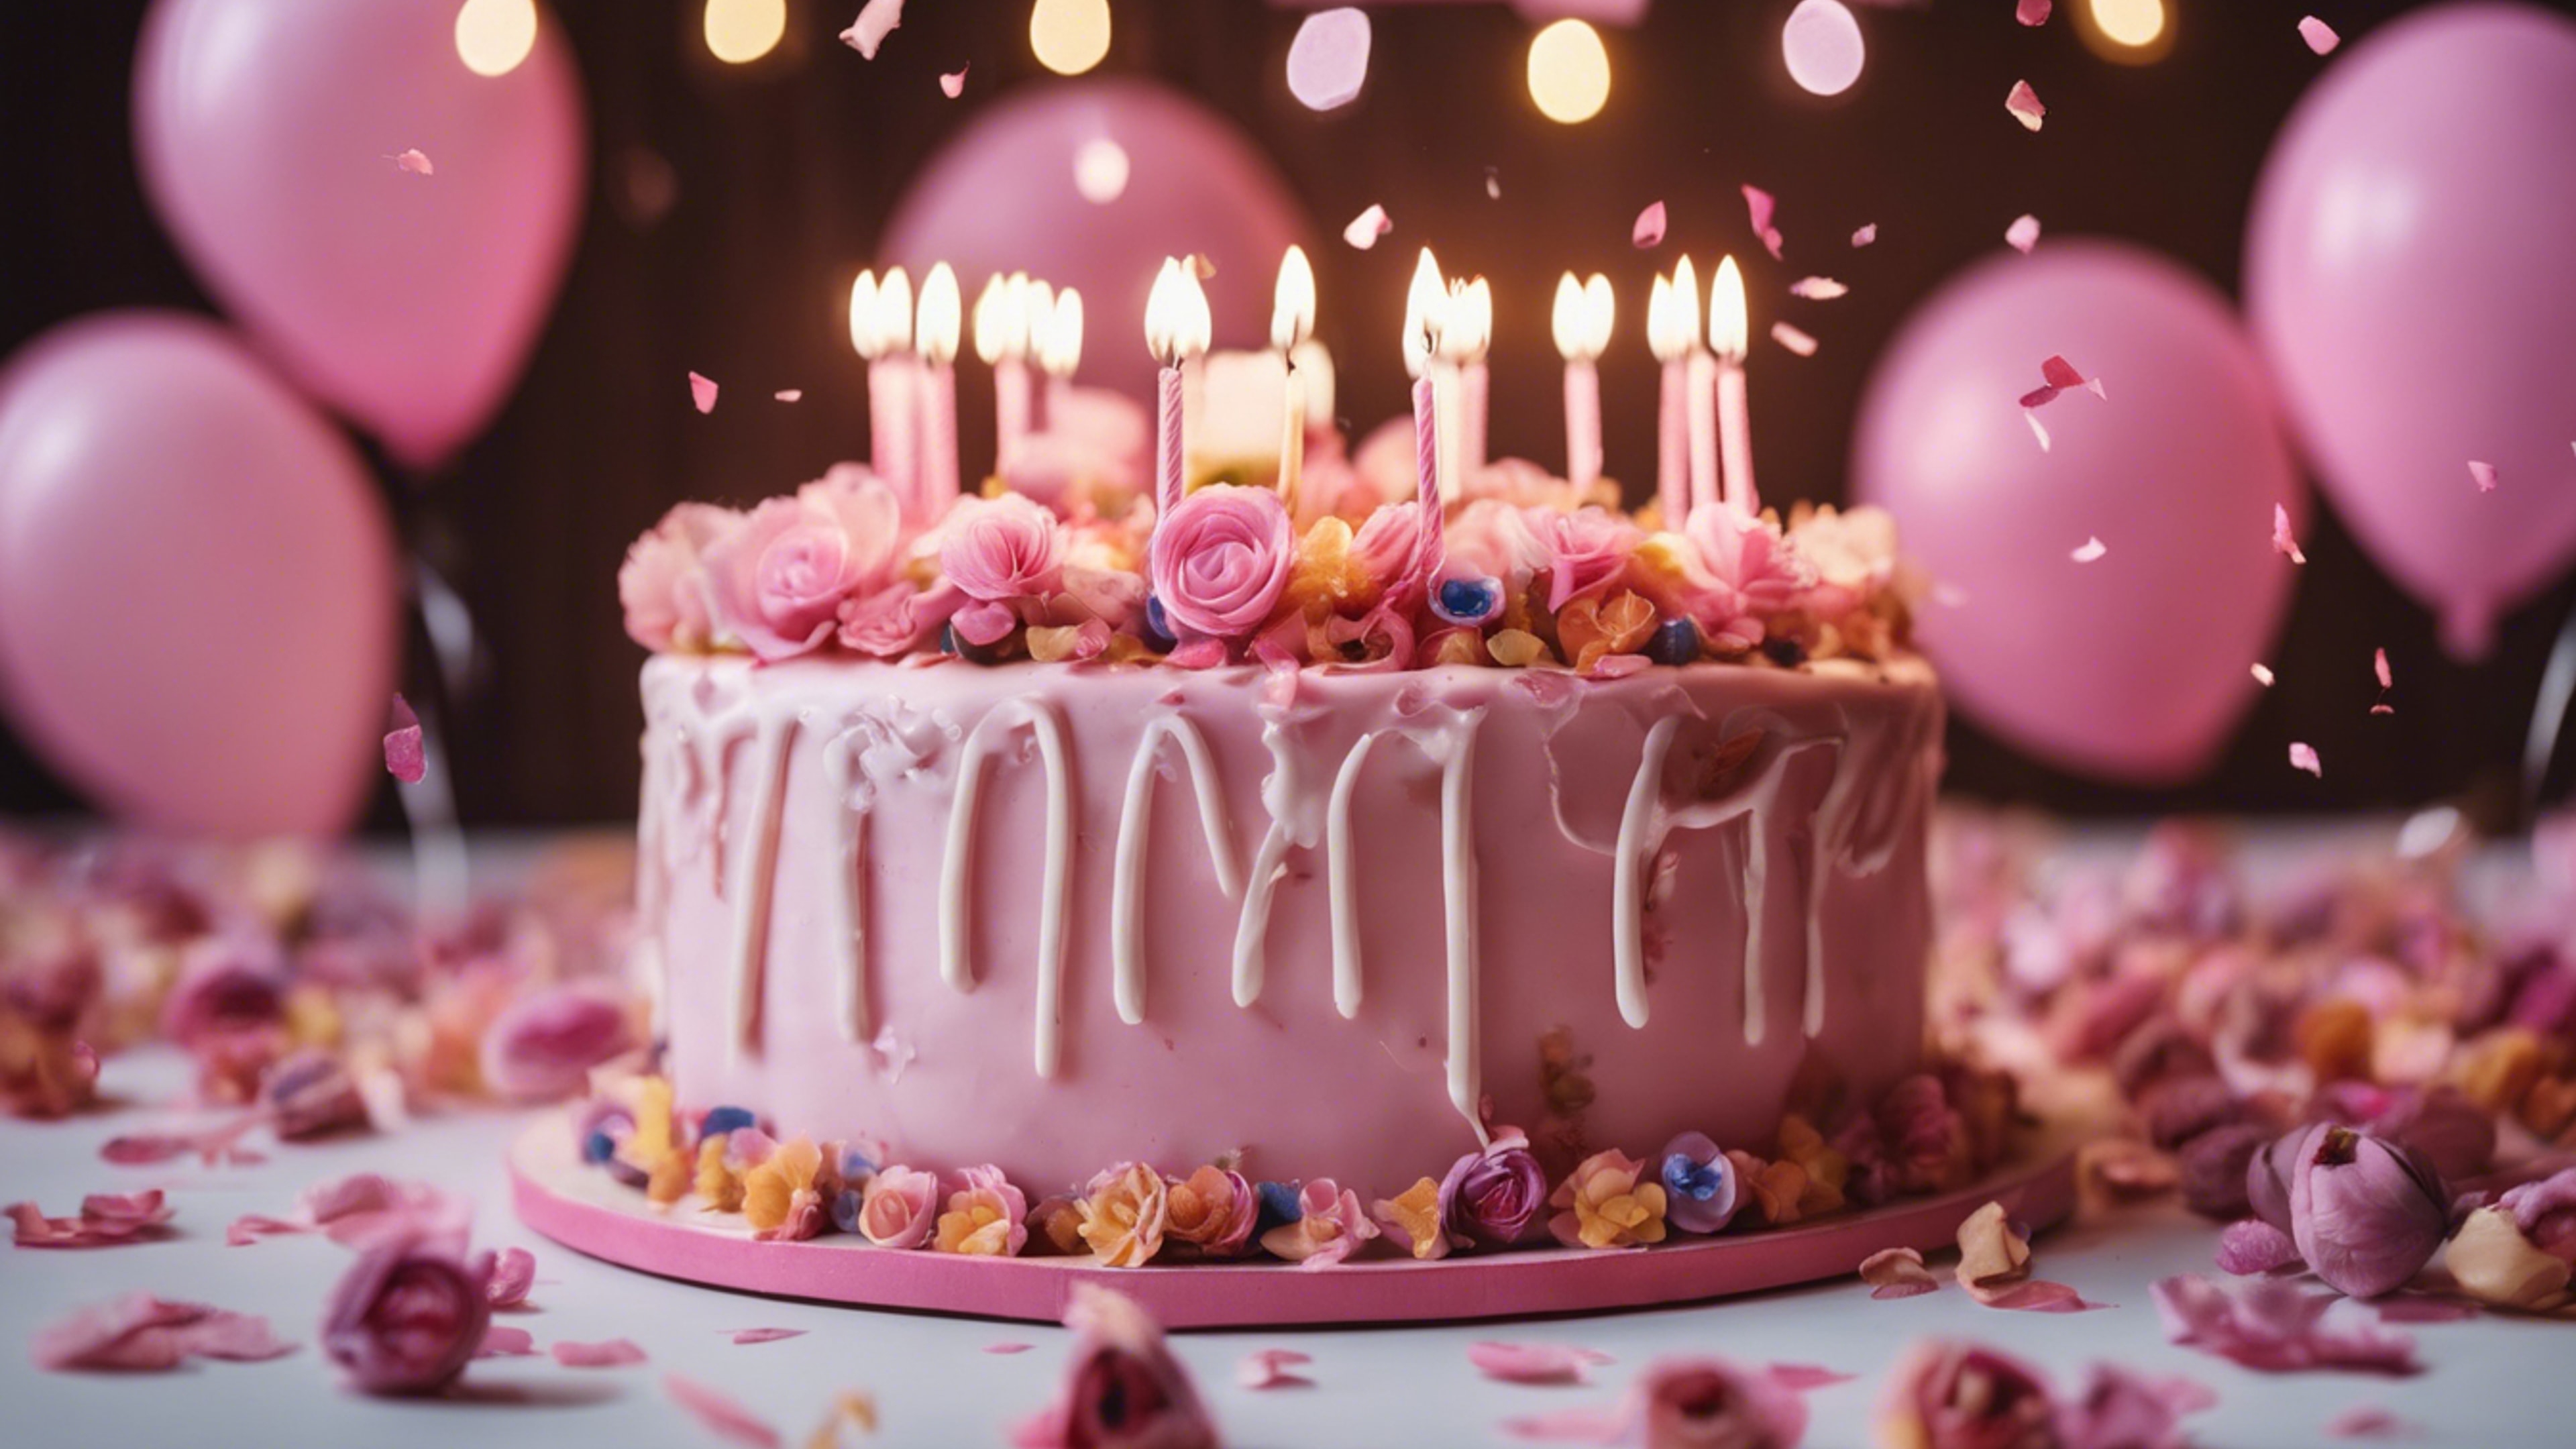 A girly birthday party with pink balloons, confetti, and a big cake decorated with edible flowers. Tapet[43e1da28e36740768483]